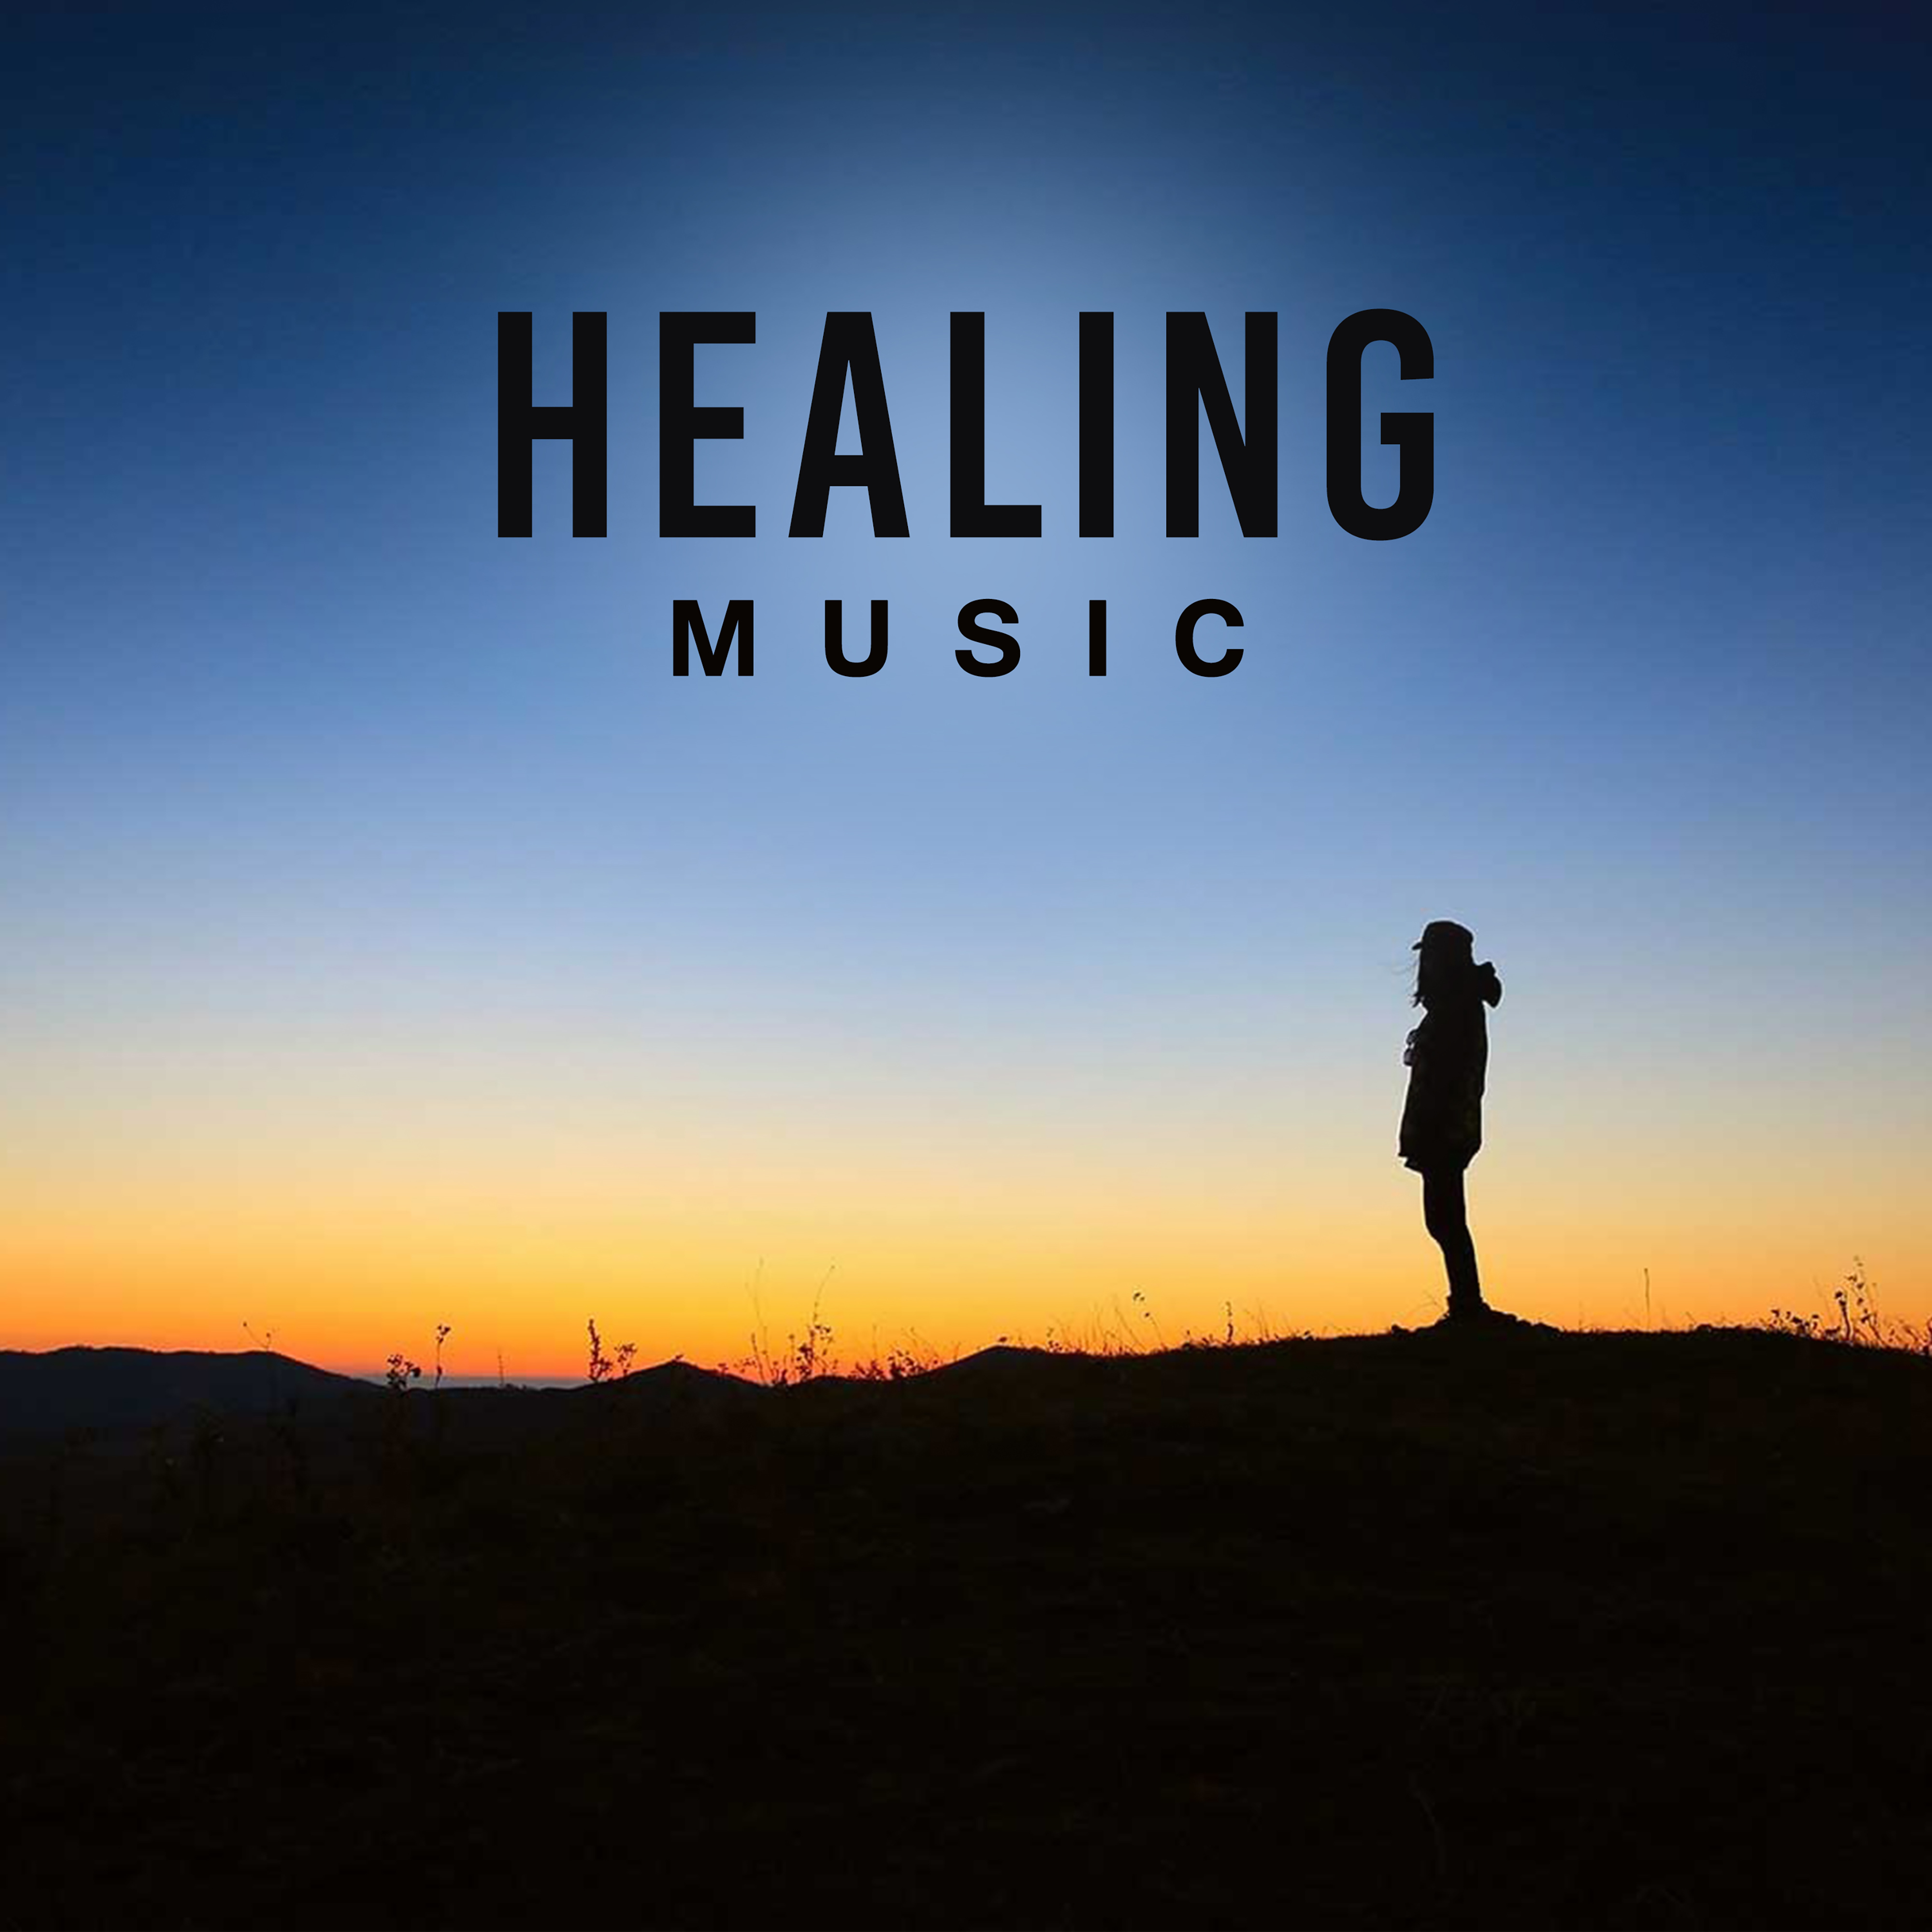 Healing Music  Peaceful Sounds for Calmness, Reiki Music, Zen, Calm Down, Relief, Restful Sleep, New Age Music for Relaxation